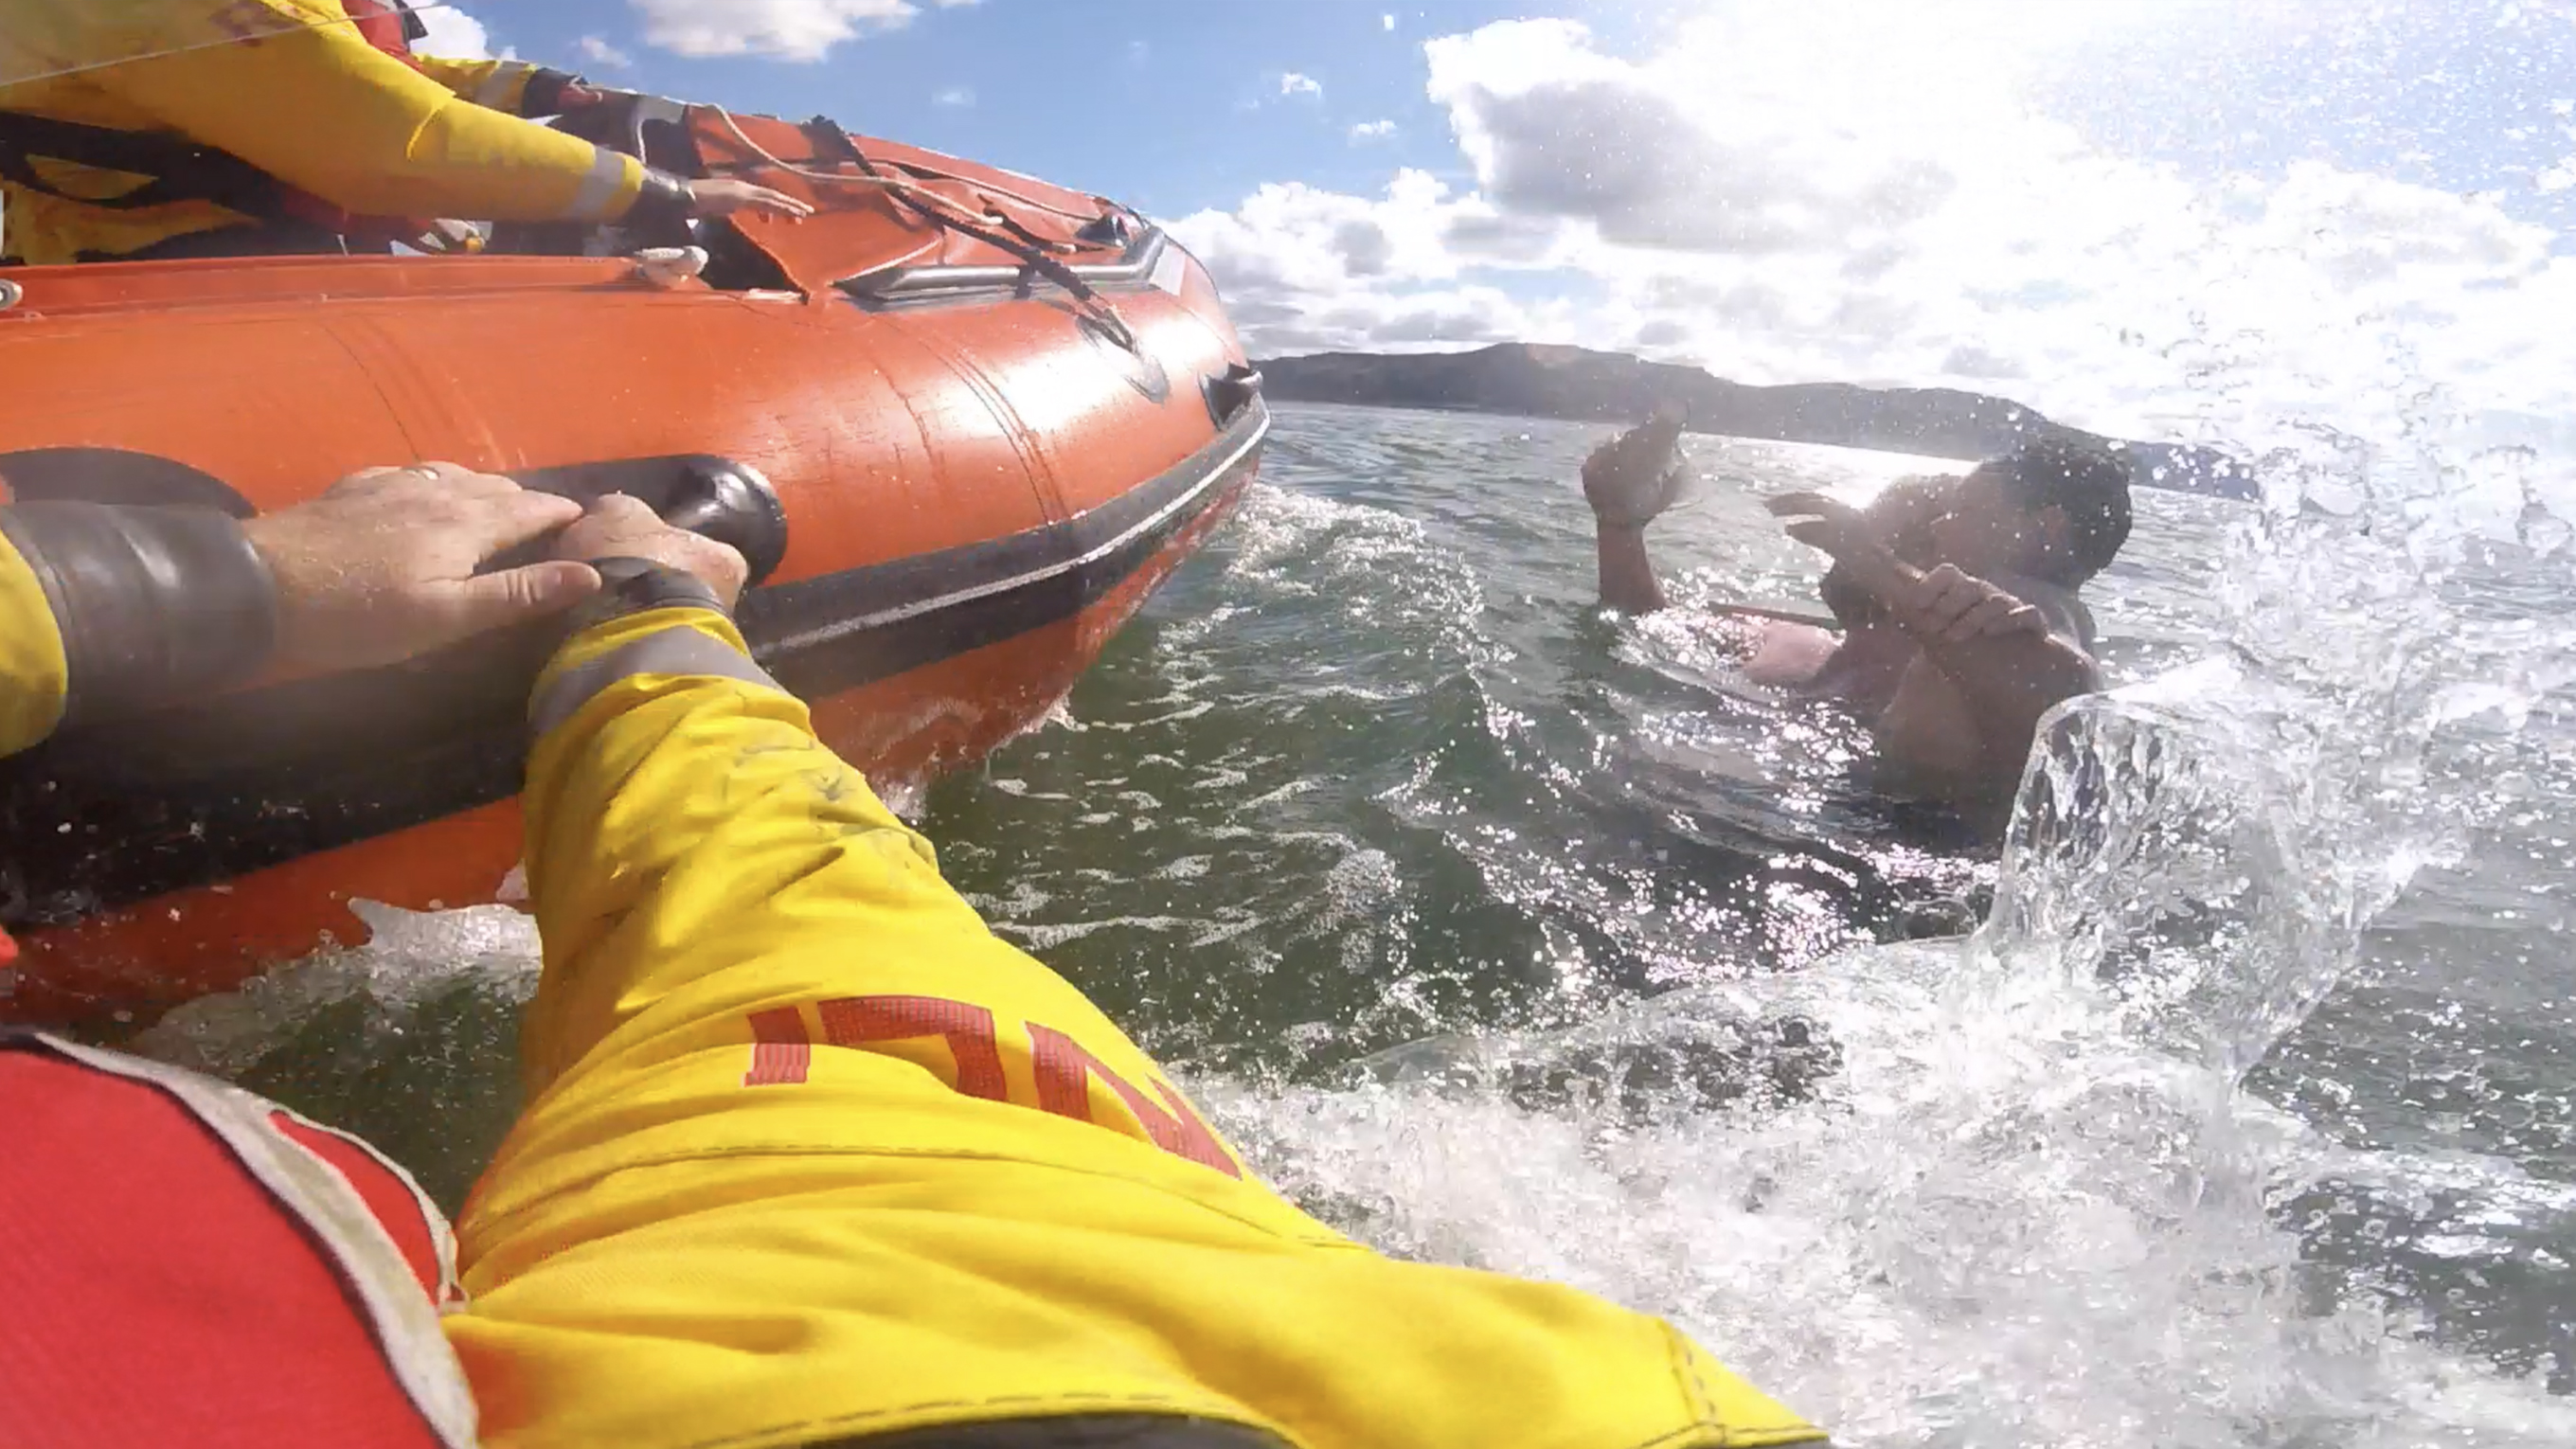 A screenshot from an RNLI lifeboat crew member’s helmet camera footage of a rescue. The crew member is in the water next to the lifeboat. A man is holding a child and they are in deep water, waving their arms.